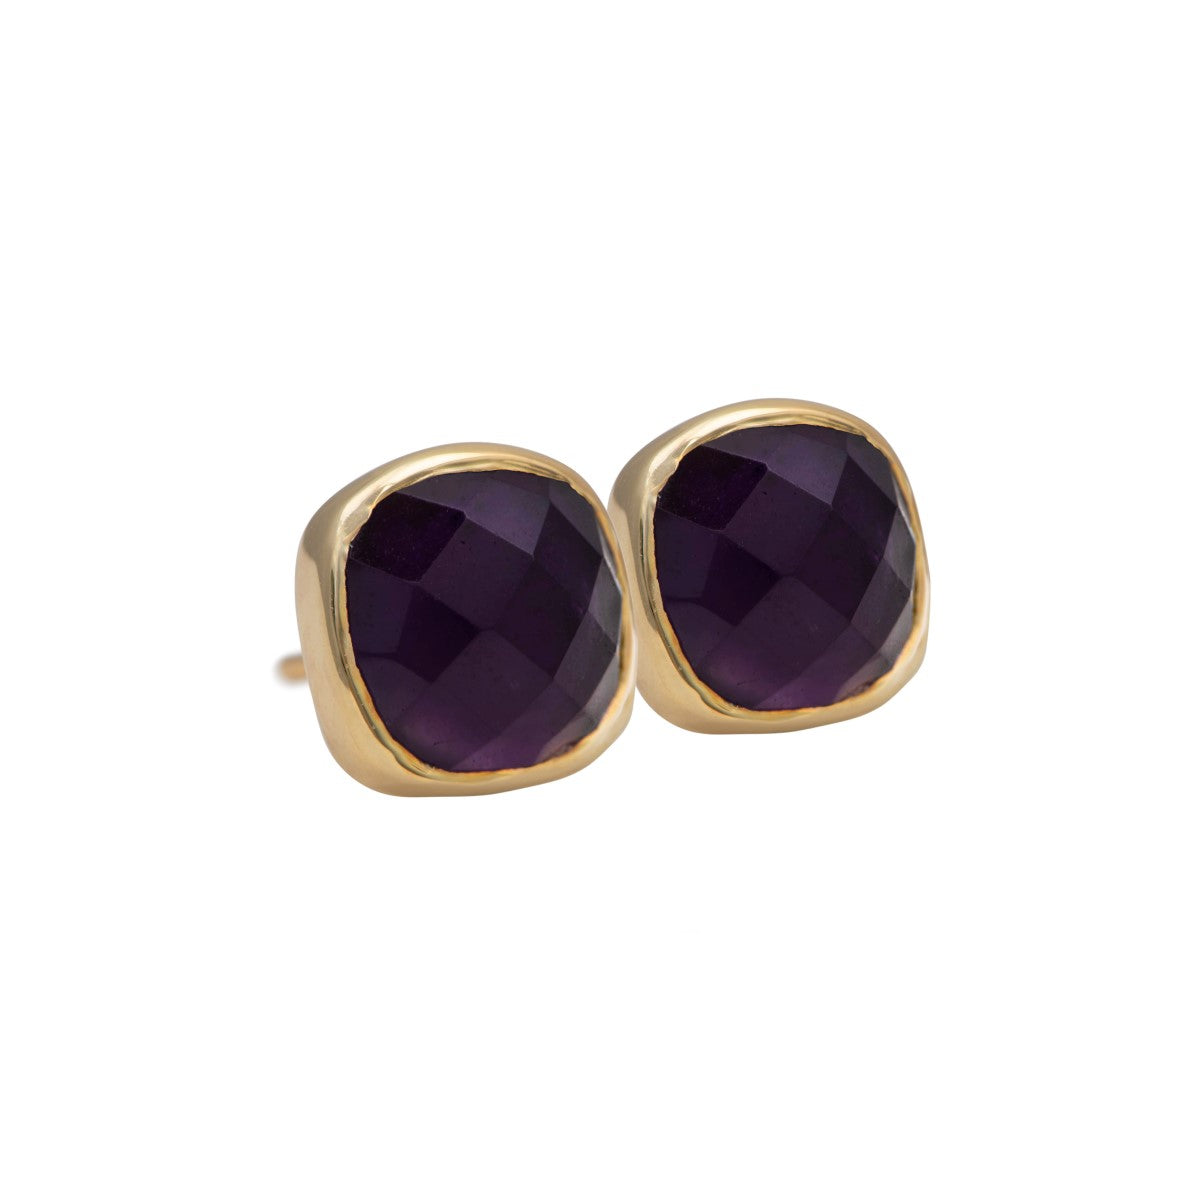 Faceted Square Amethyst Gemstone Stud Earrings in Gold Plated Sterling Silver